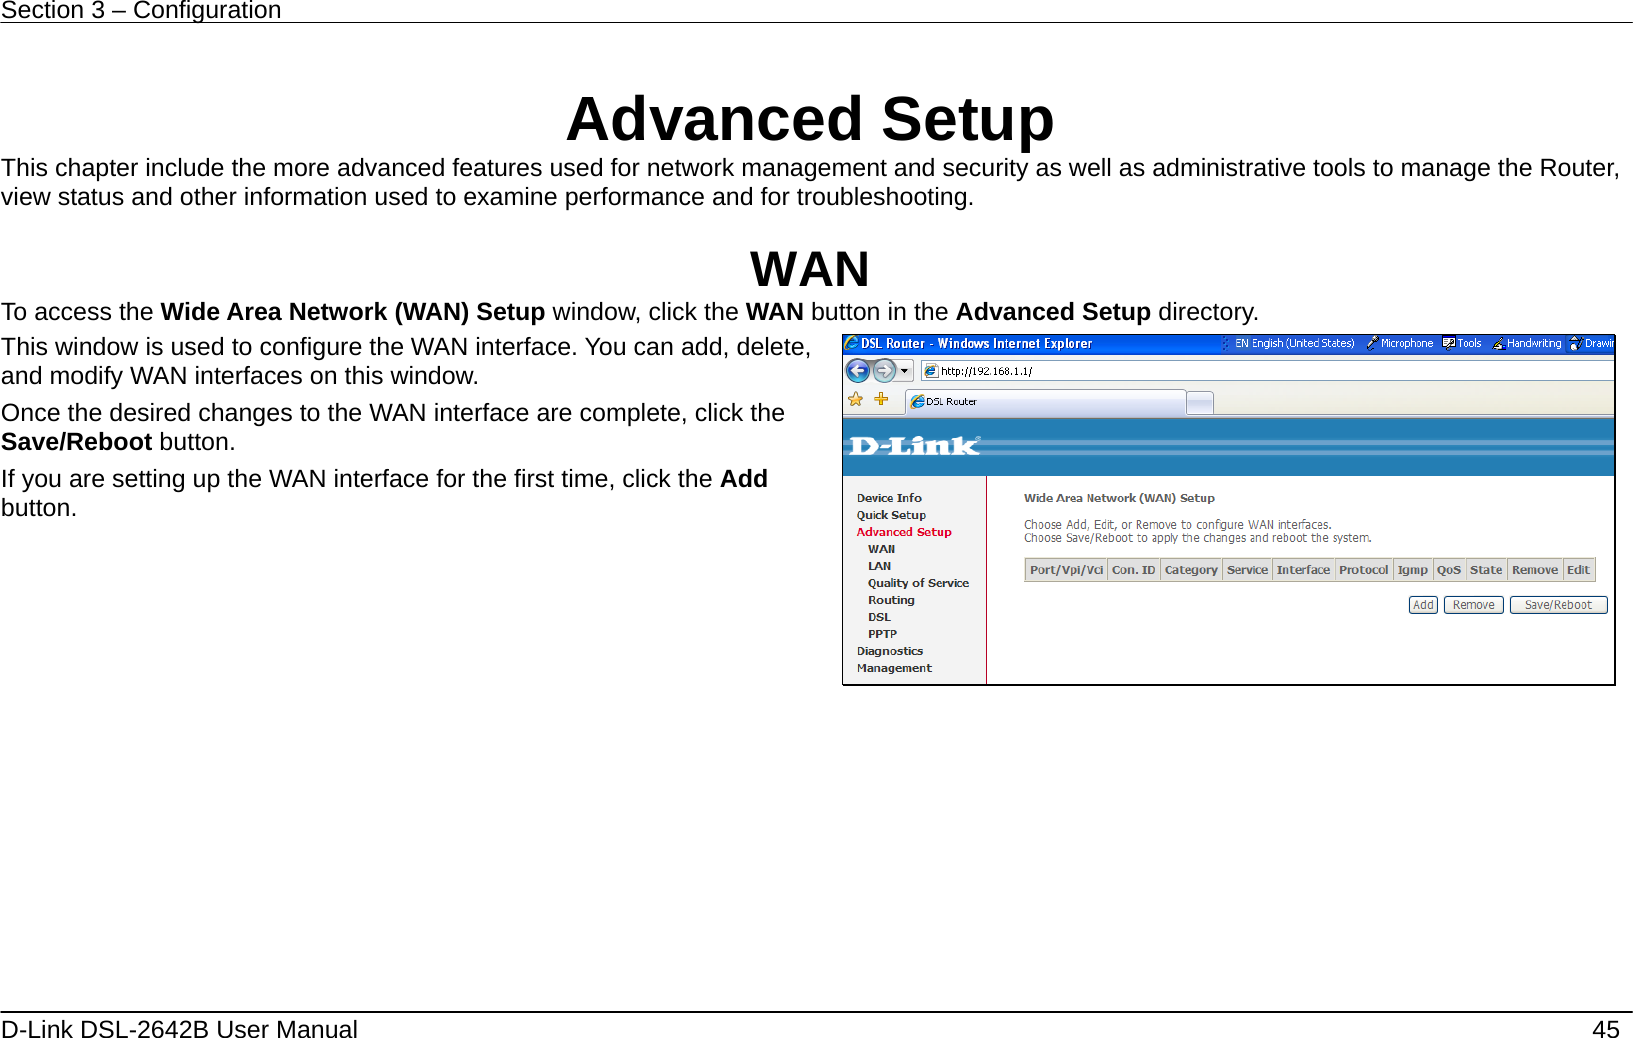 Section 3 – Configuration   D-Link DSL-2642B User Manual    45    Advanced Setup This chapter include the more advanced features used for network management and security as well as administrative tools to manage the Router, view status and other information used to examine performance and for troubleshooting.  WAN To access the Wide Area Network (WAN) Setup window, click the WAN button in the Advanced Setup directory. This window is used to configure the WAN interface. You can add, delete, and modify WAN interfaces on this window.   Once the desired changes to the WAN interface are complete, click the Save/Reboot button. If you are setting up the WAN interface for the first time, click the Add button.      